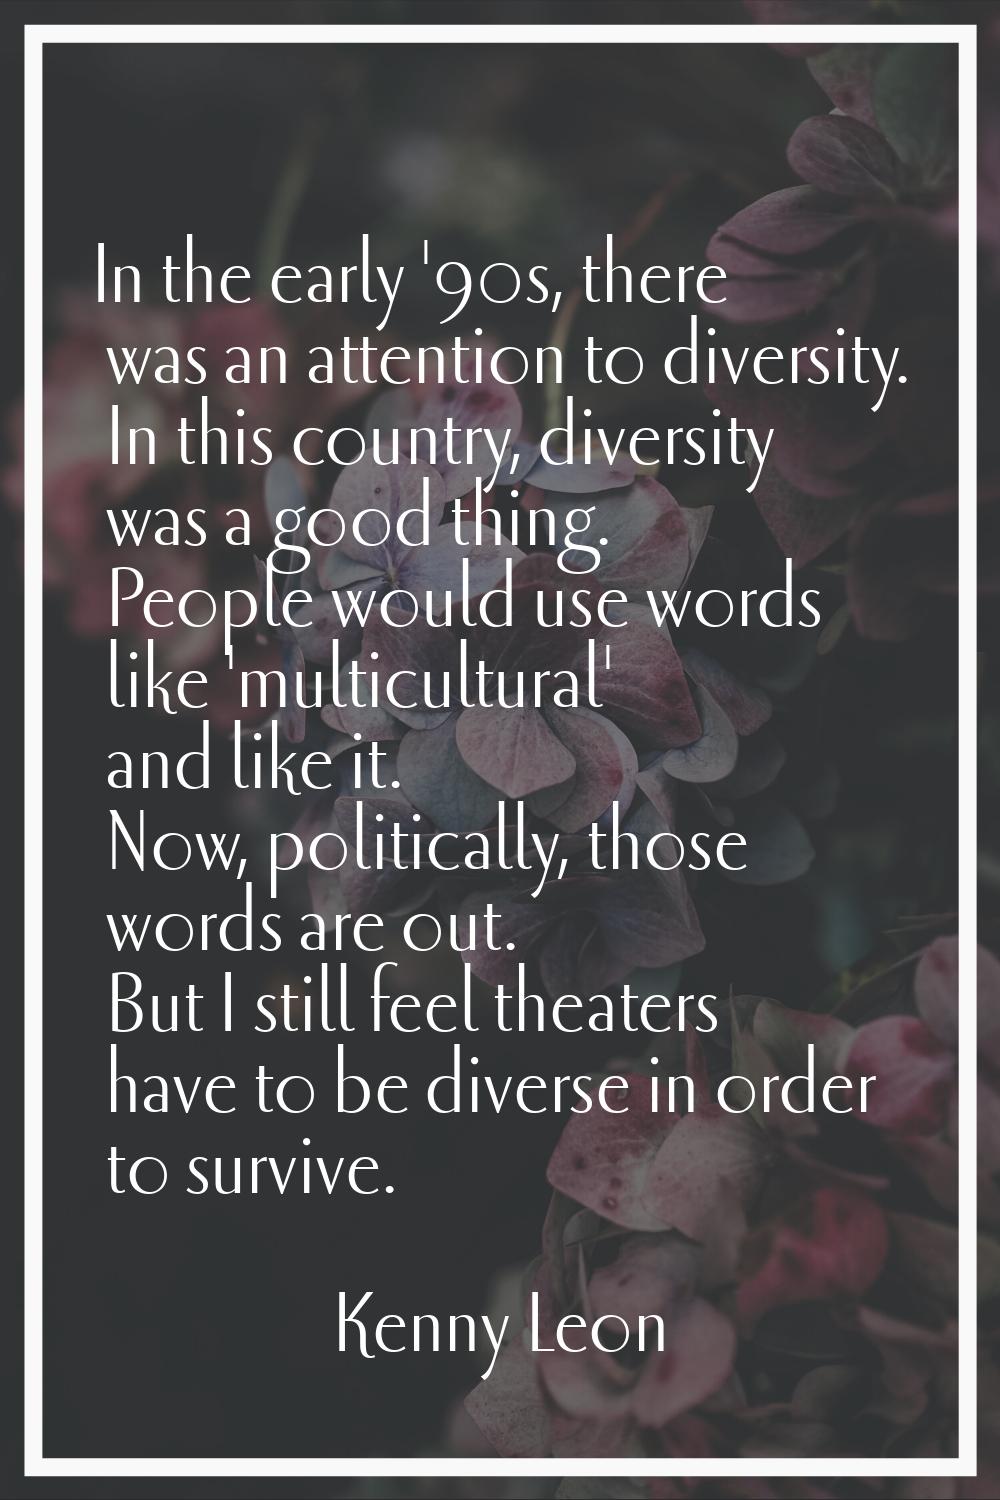 In the early '90s, there was an attention to diversity. In this country, diversity was a good thing